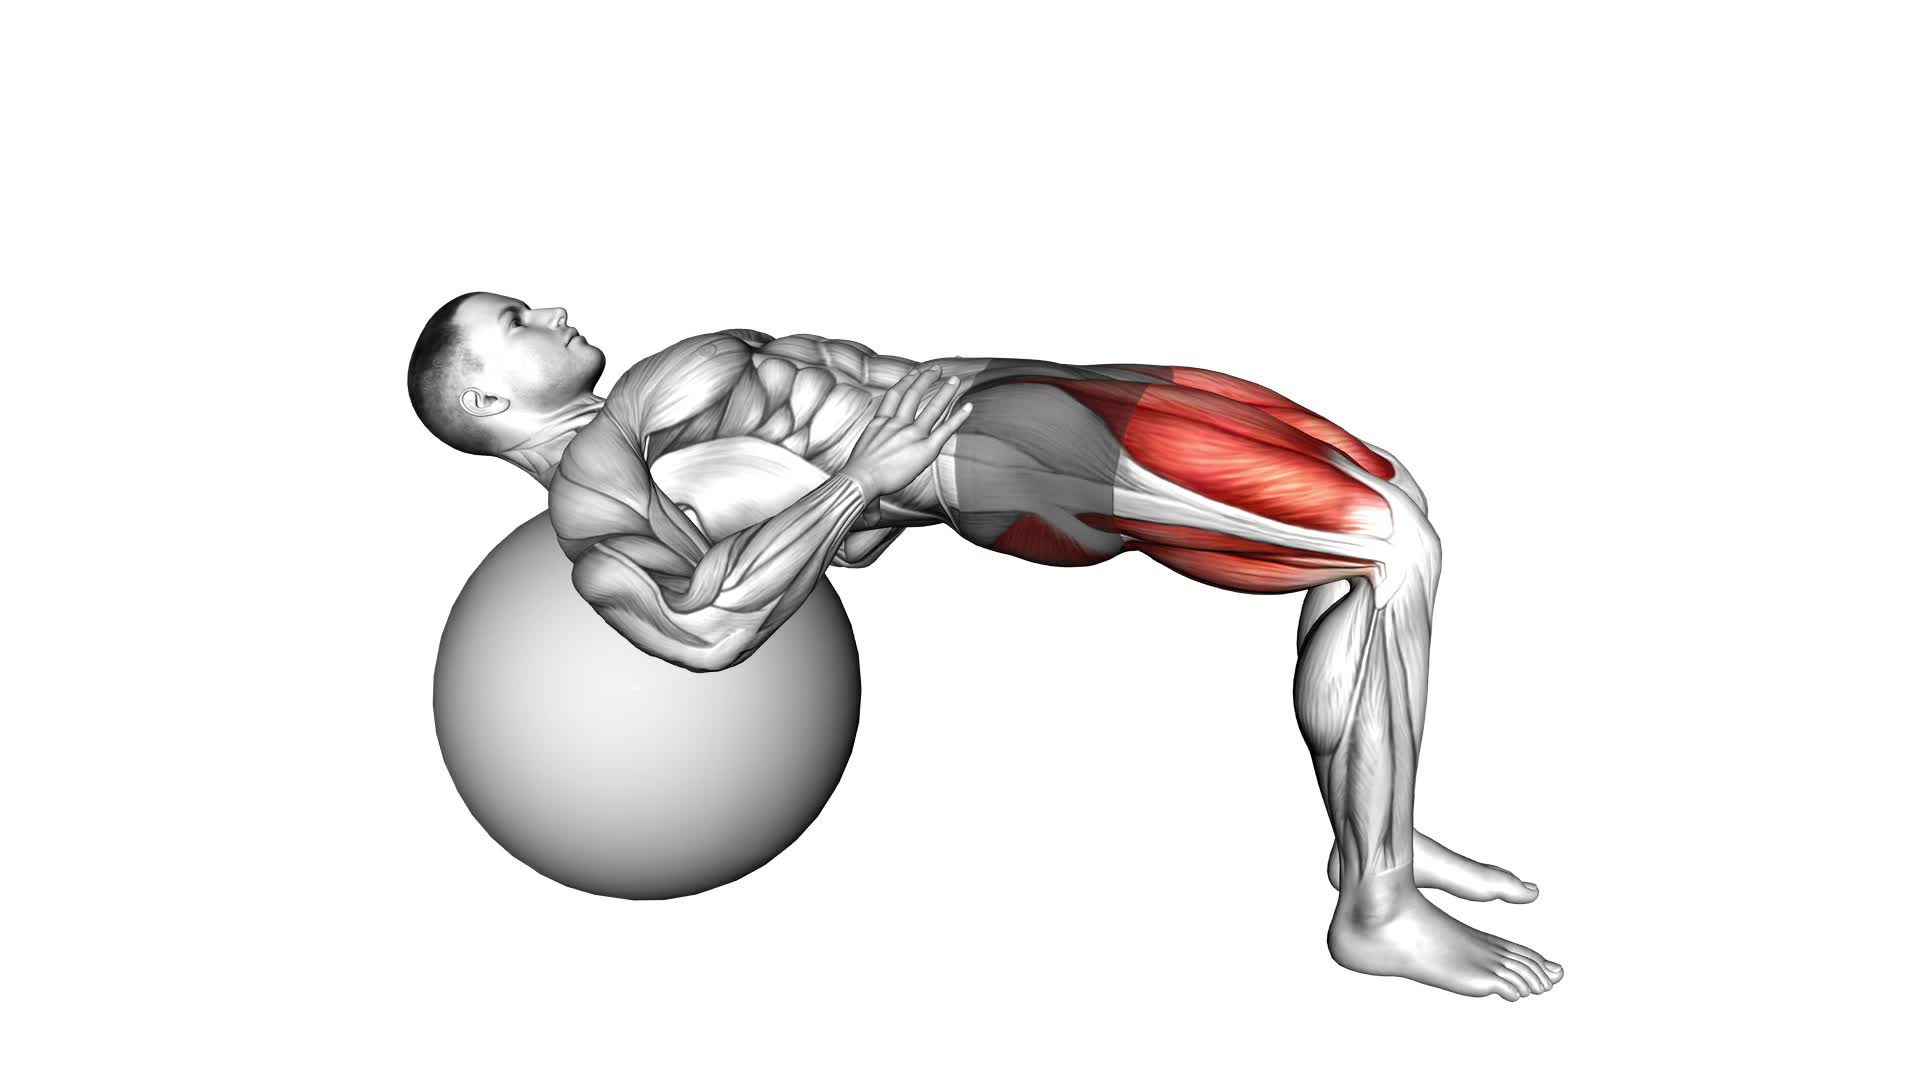 Lying Hip Lift (On Stability Ball) (Male) - Video Exercise Guide & Tips